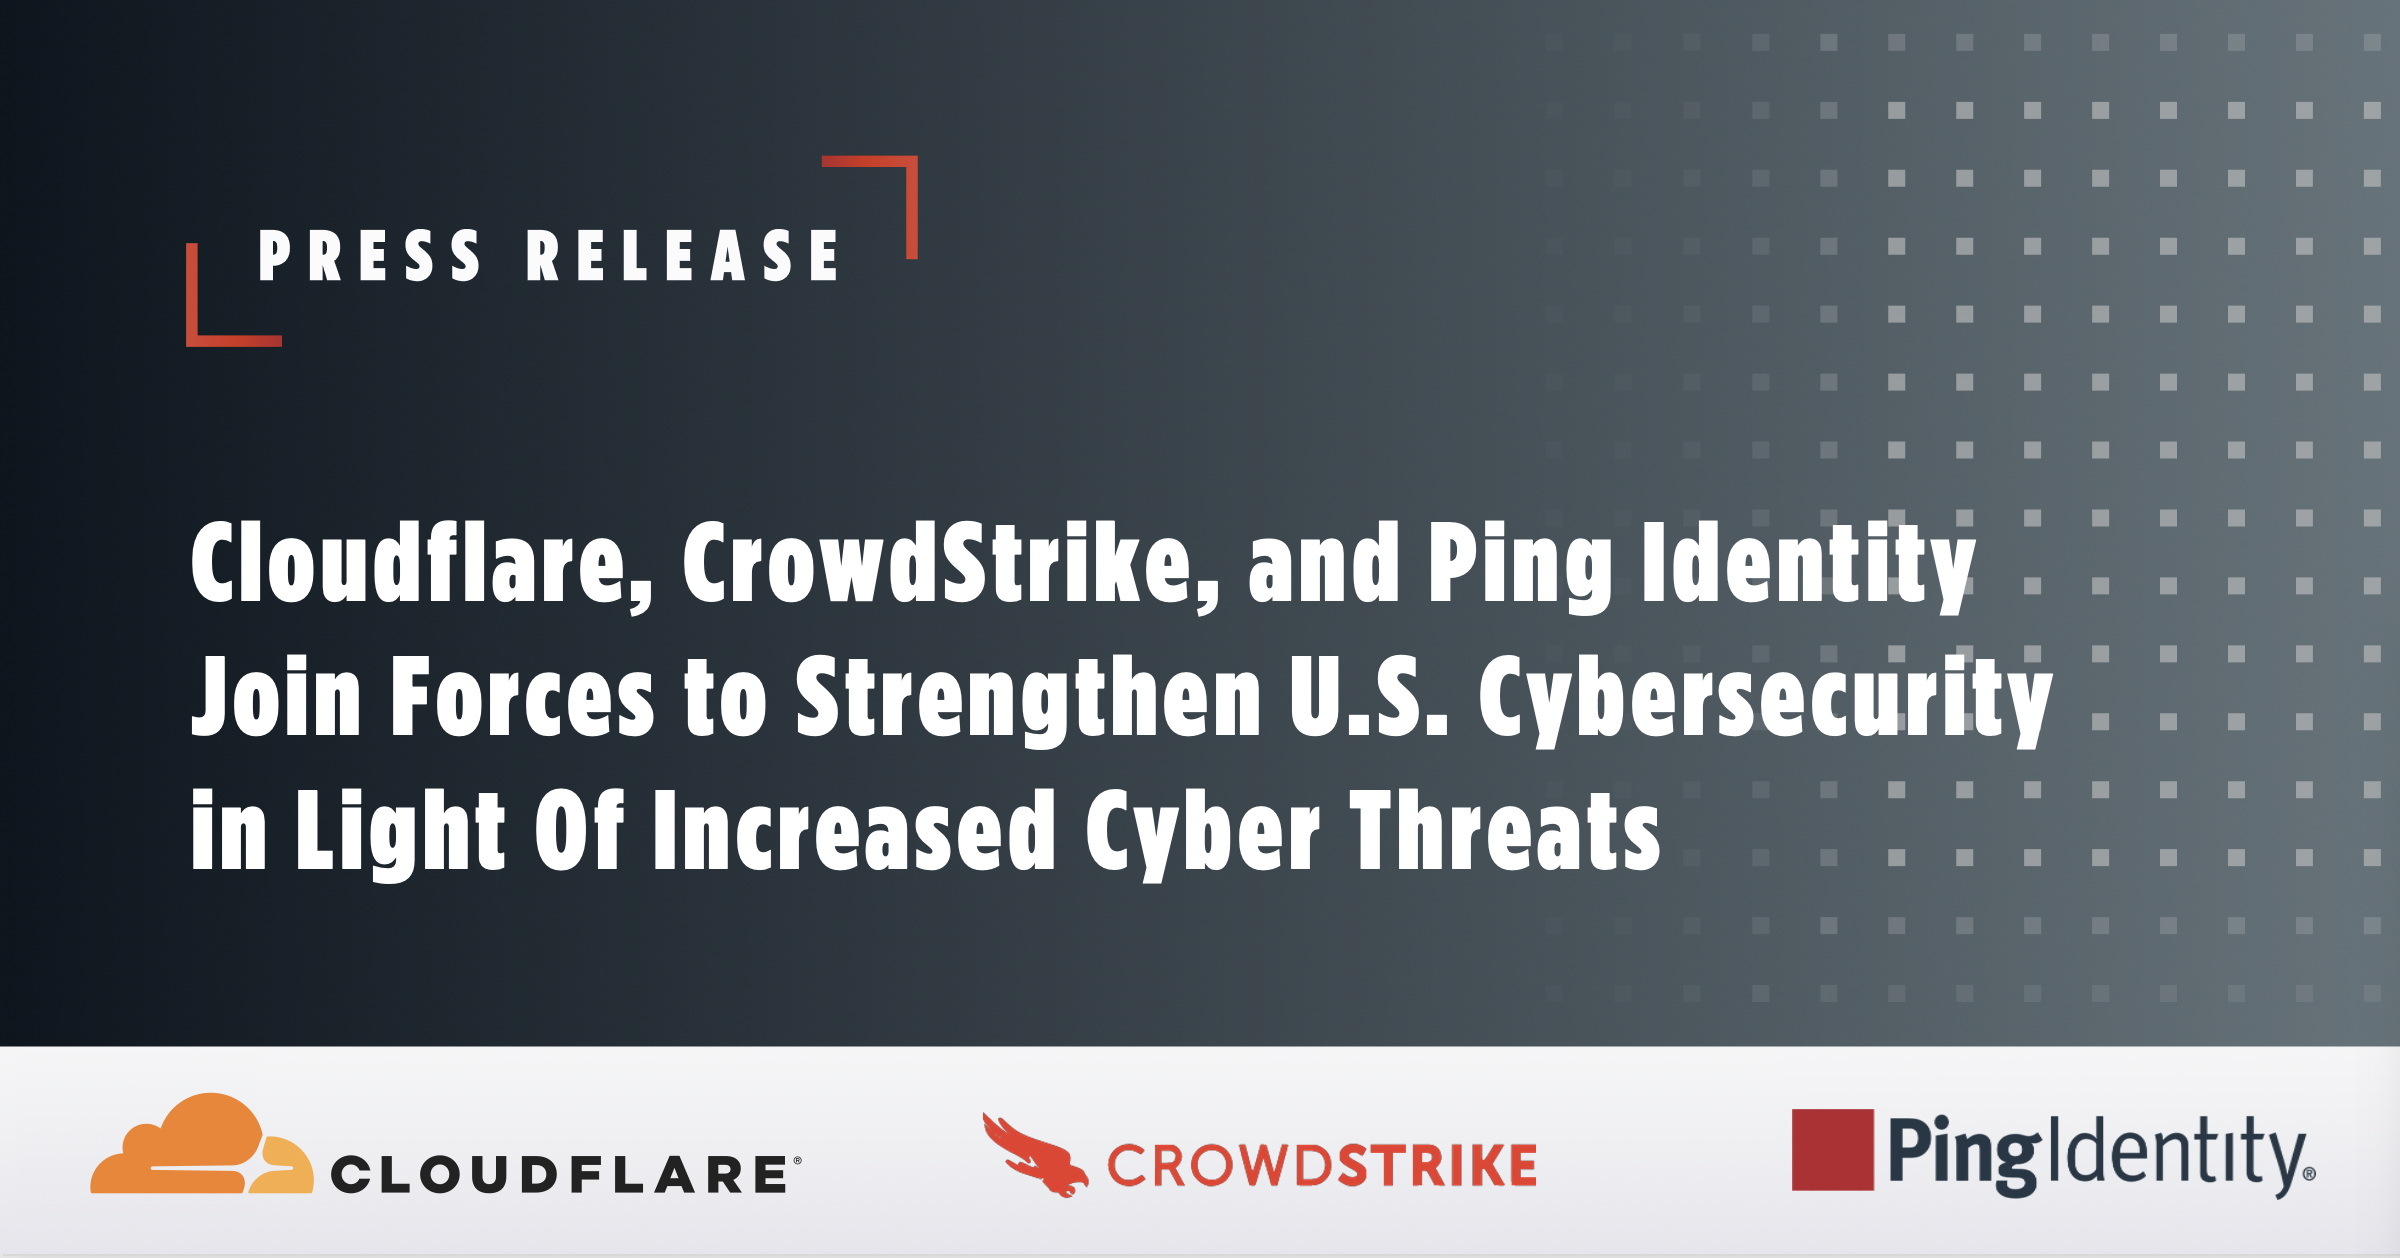 Cloudflare, CrowdStrike, and Ping Identity Join Forces to Strengthen U.S. Cybersecurity in Light Of Increased Cyber Threats